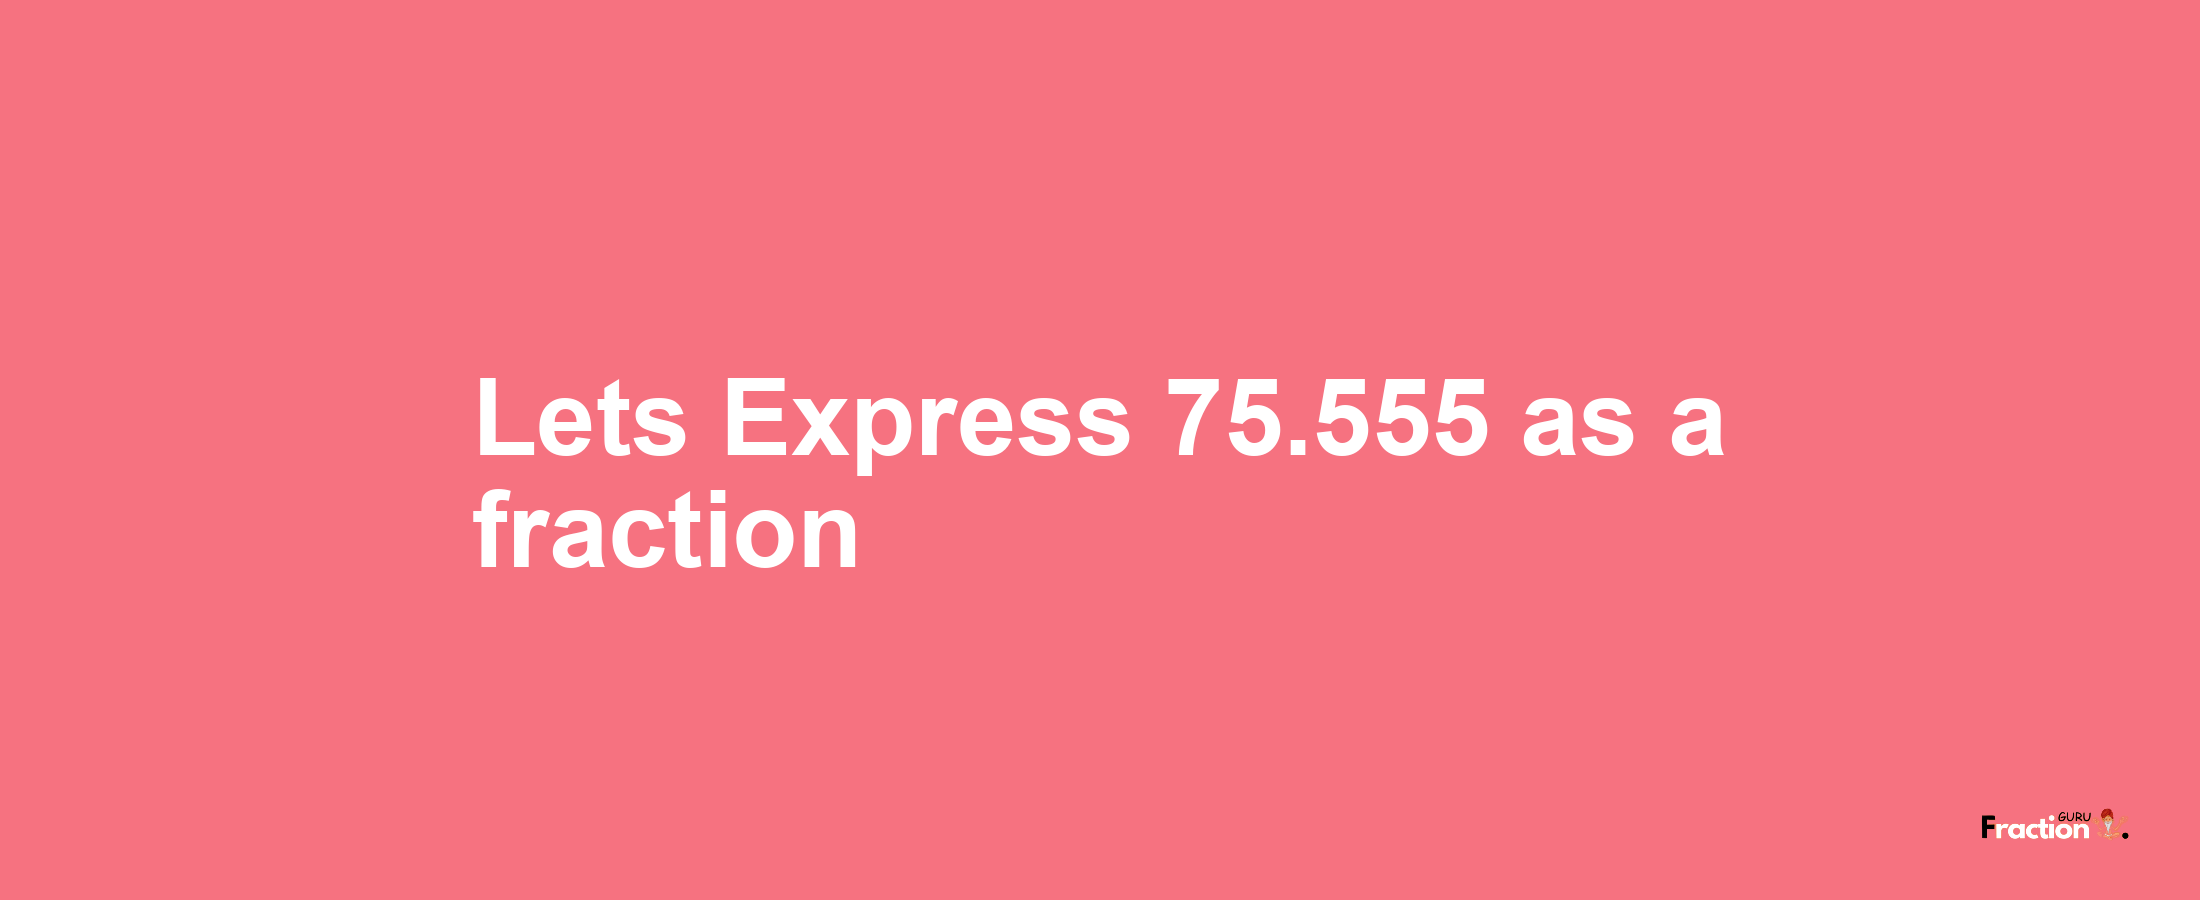 Lets Express 75.555 as afraction